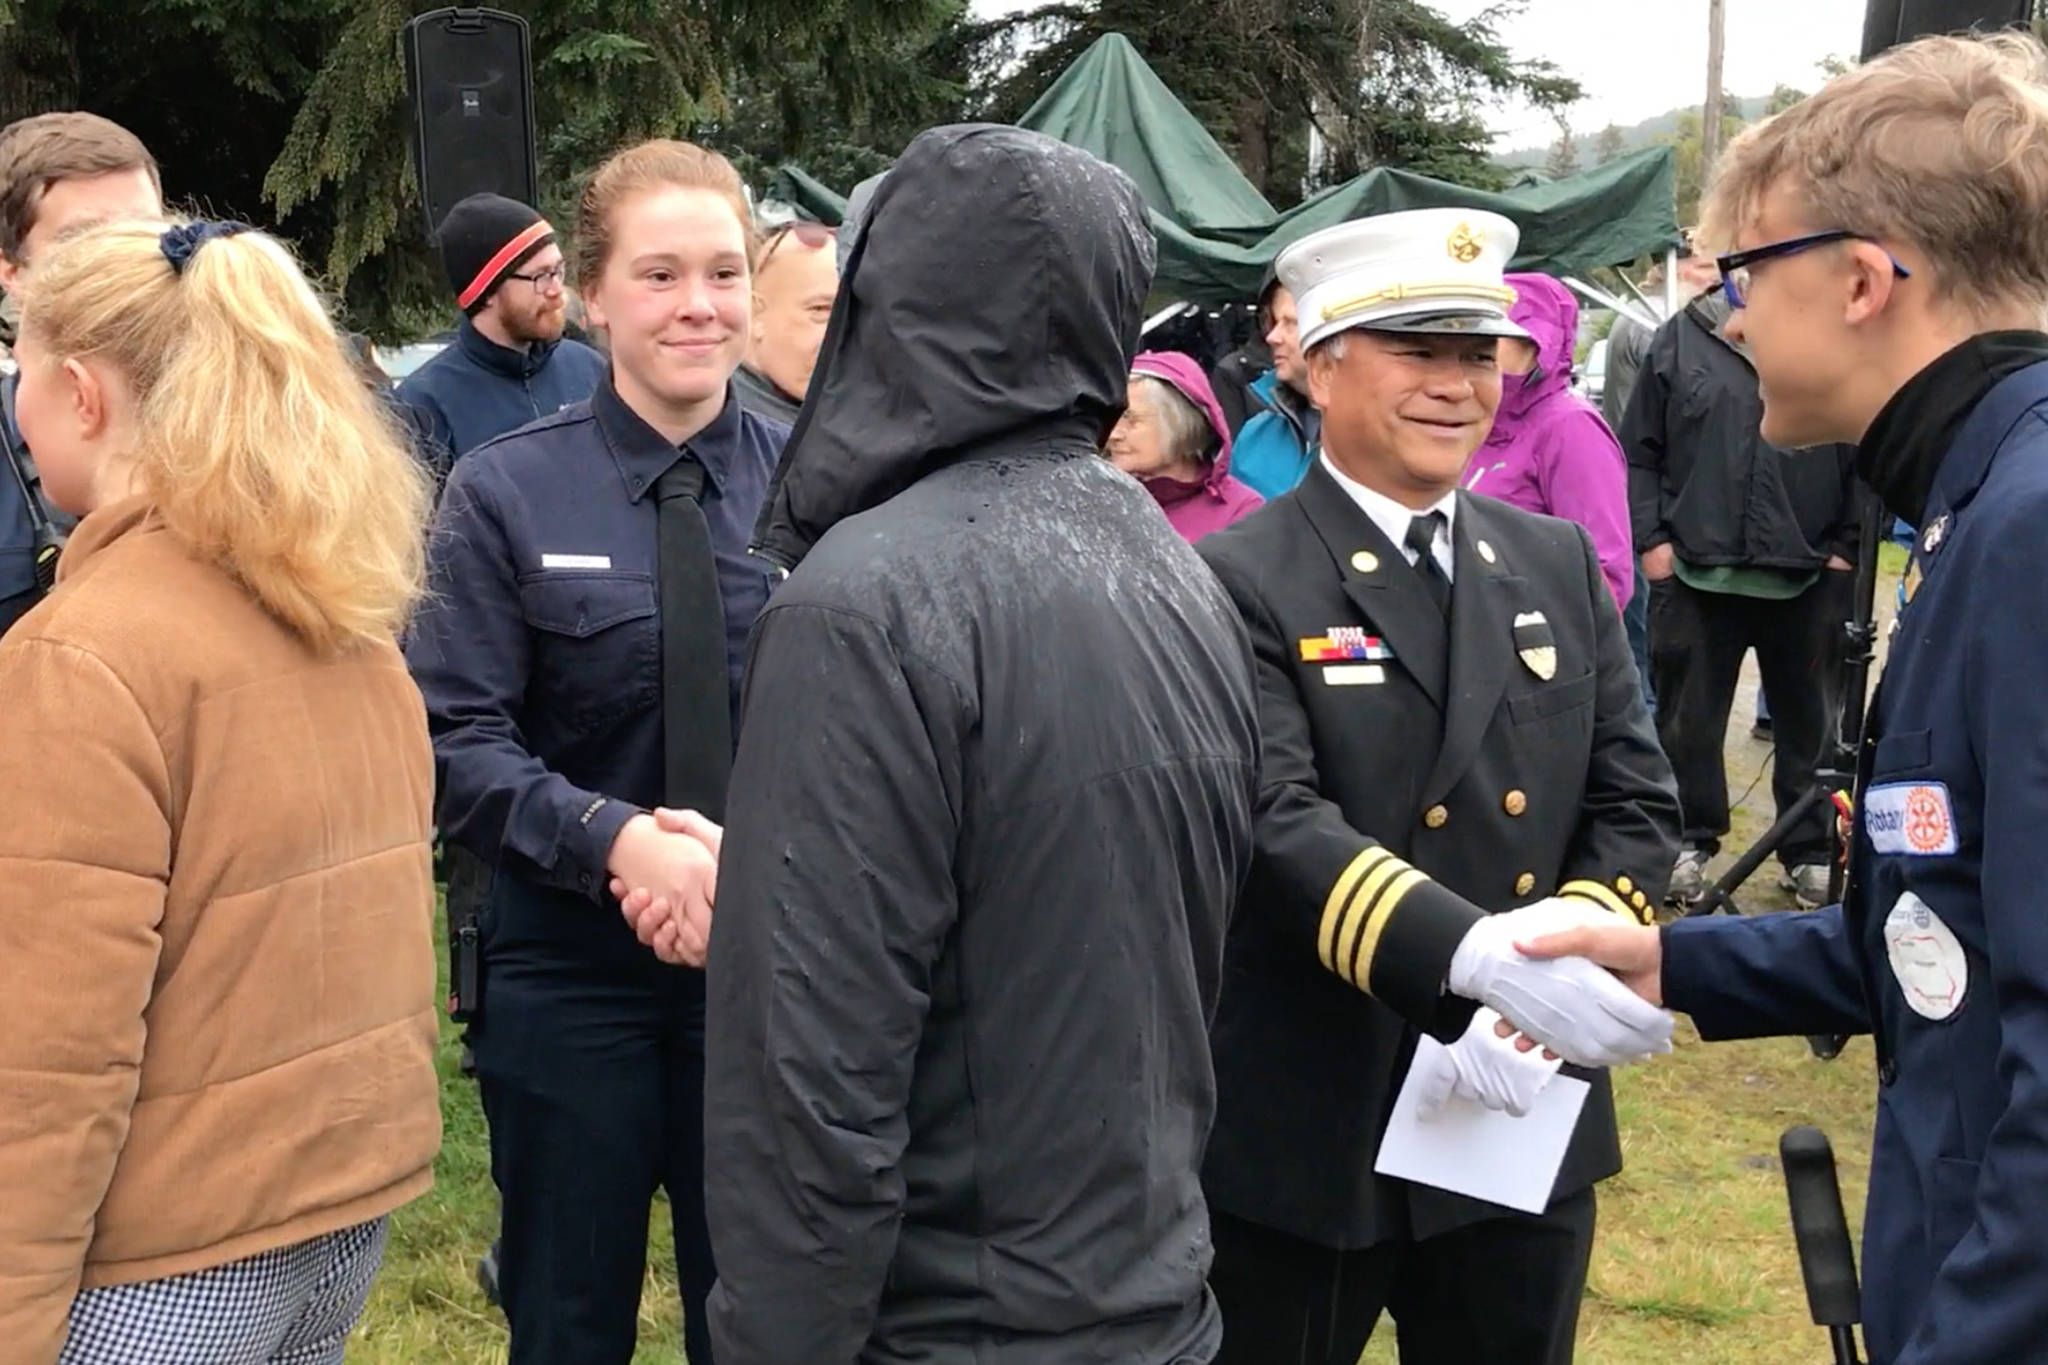 Juneau residents greet first responders during a 9/11 Memorial at Rotary Park on Sept. 11, 2019. (Michael Penn | Juneau Empire)